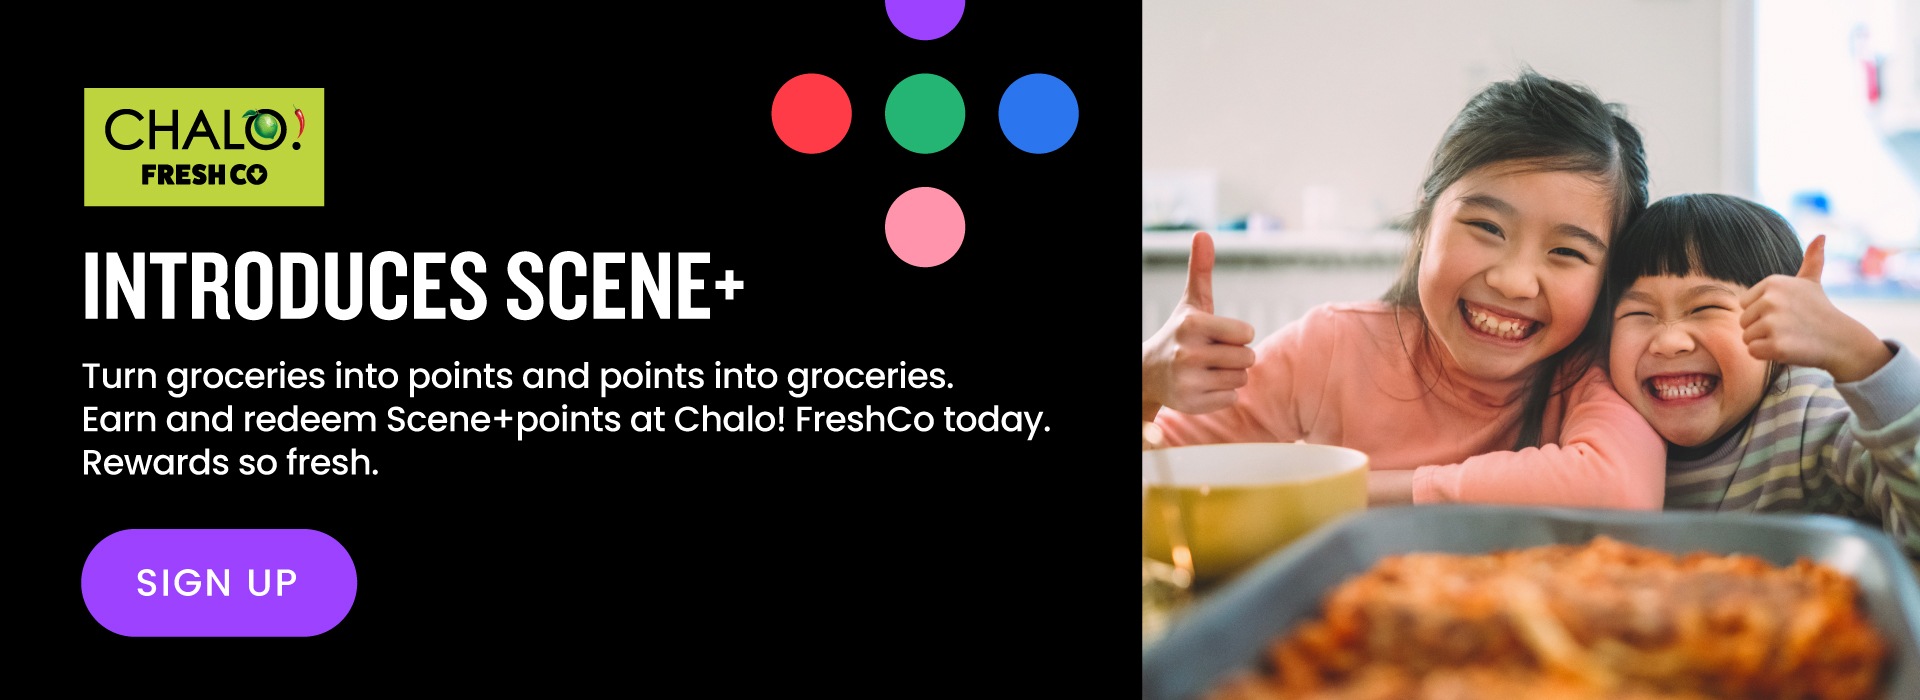 Text Reading 'Chalo! Fresh Co introduces Scene+. Turn groceries into points and points into groceries. Earn and redeem Scene+ points at Chalo! FreshCo today. Rewards so fresh. Click on "Sign Up" button to get started.'